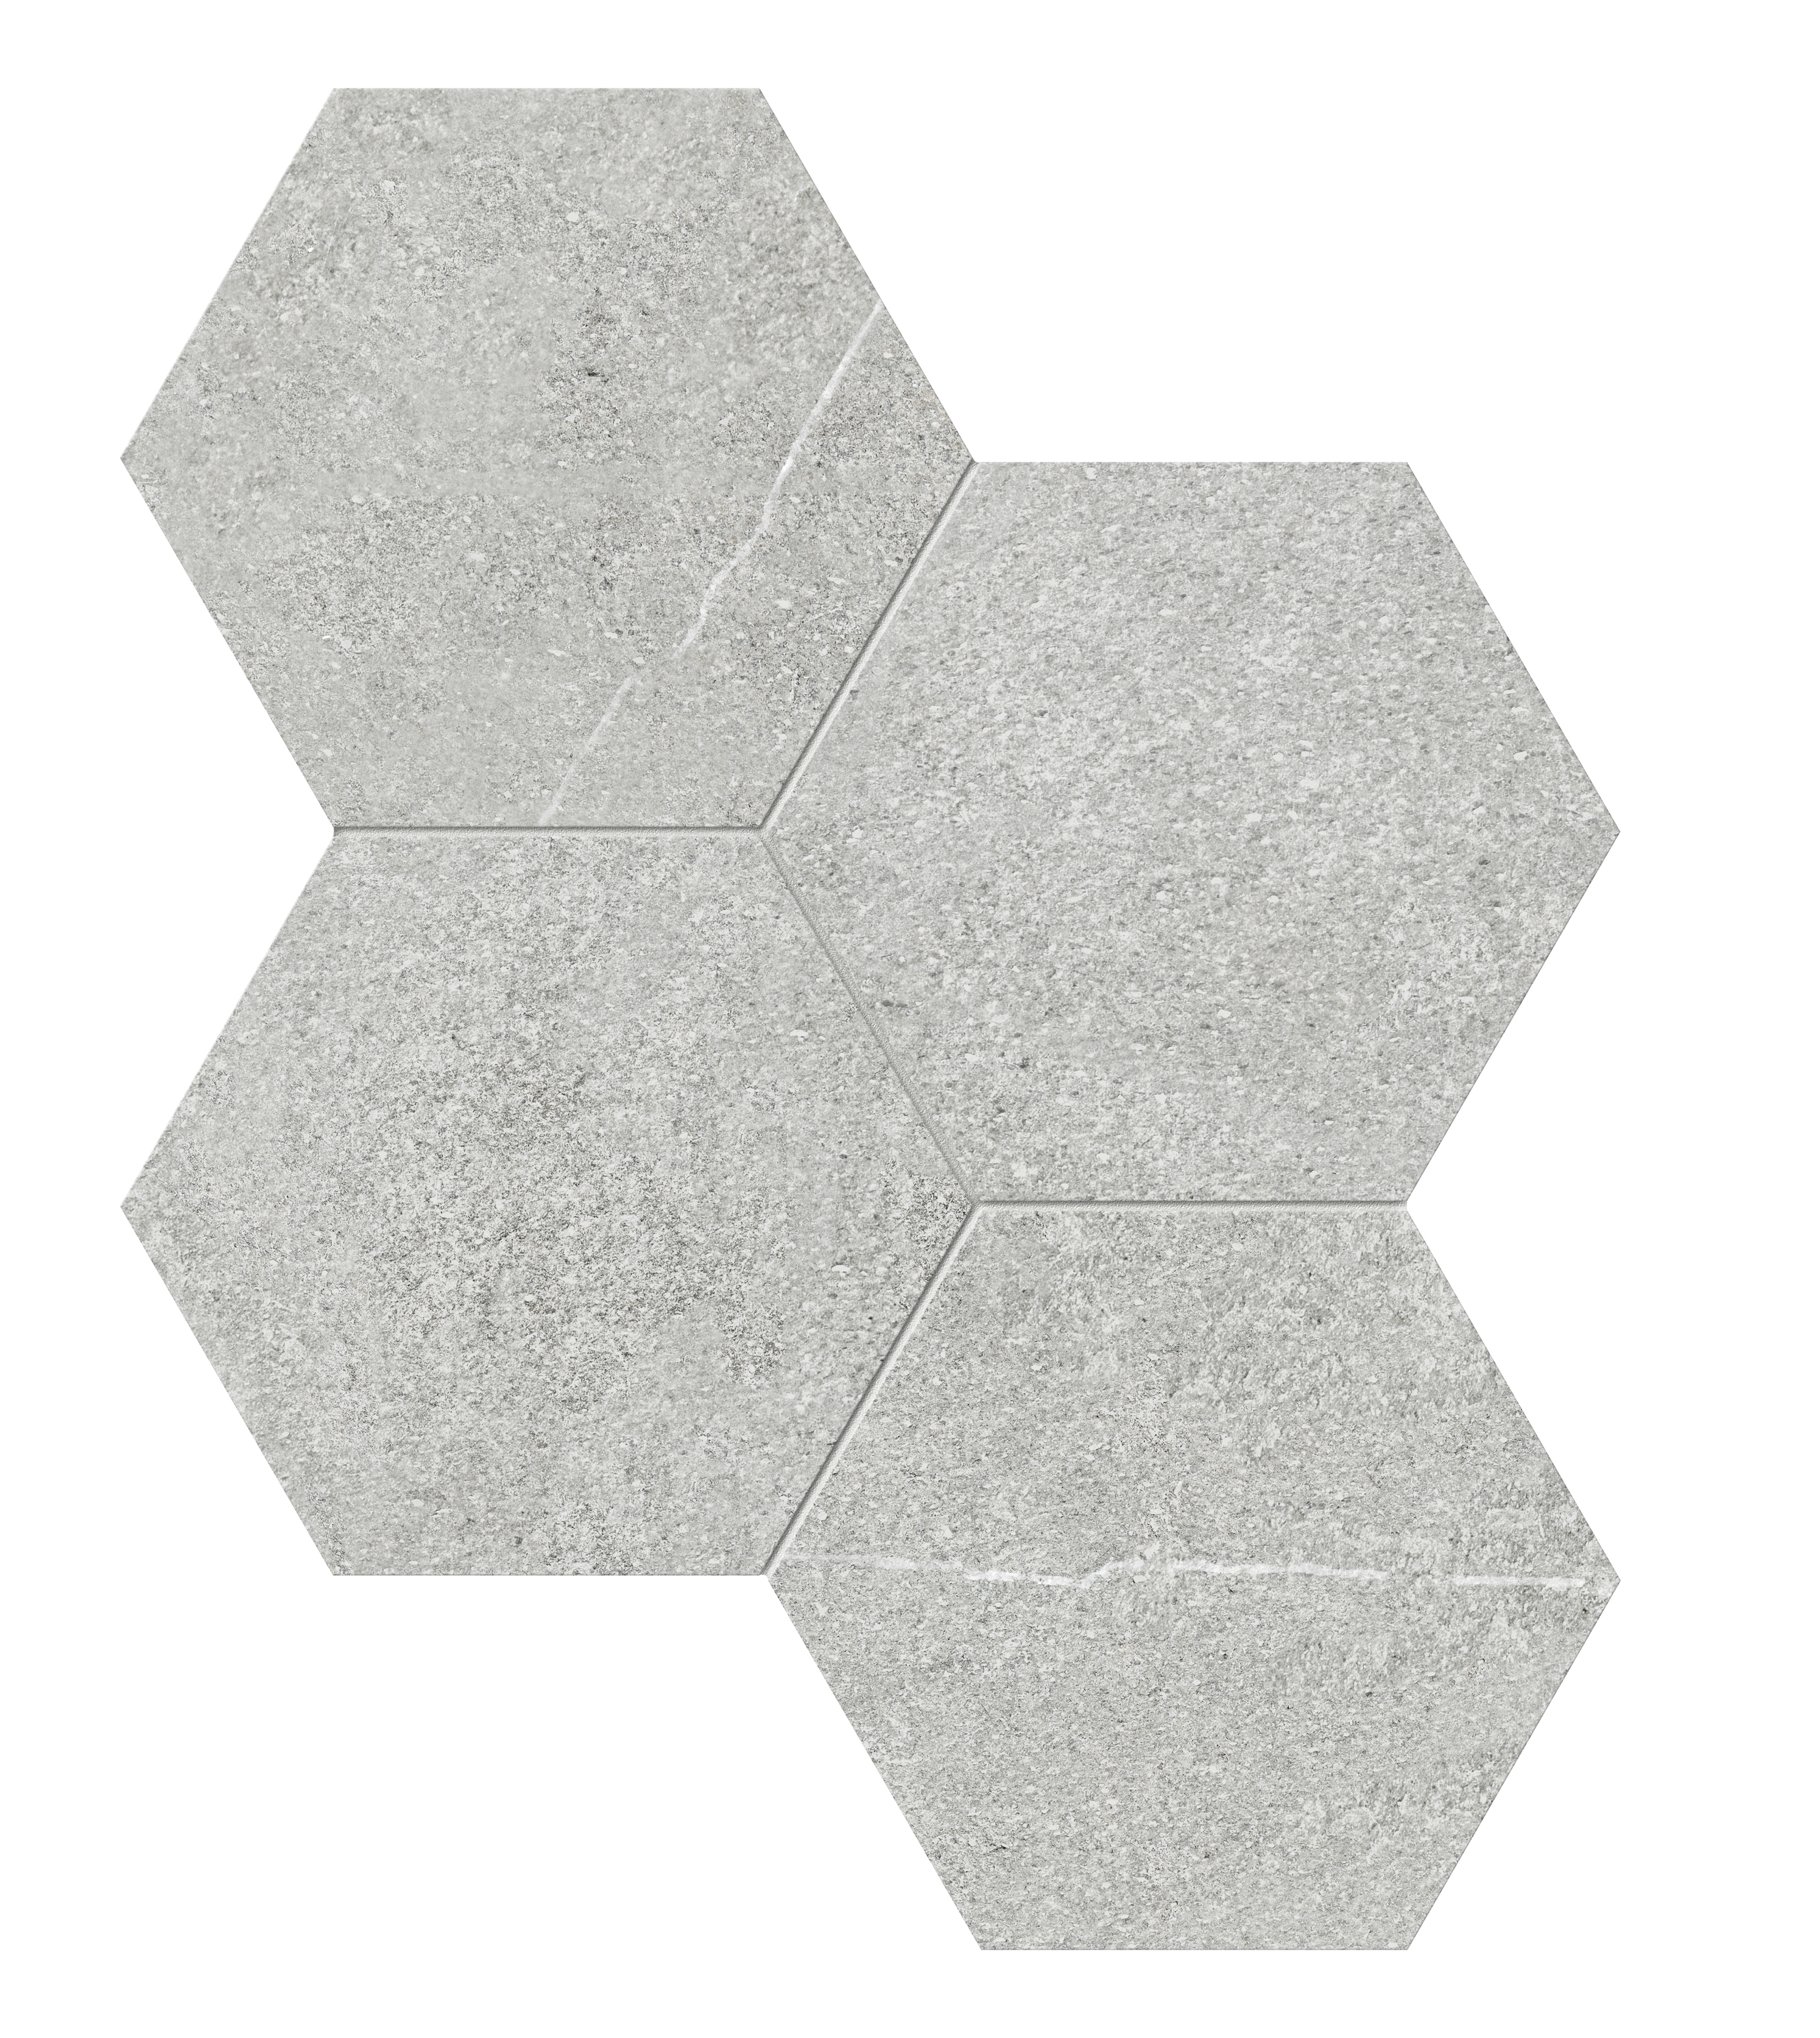 ash hexagon 6-inch pattern color body porcelain mosaic from mjork anatolia collection distributed by surface group international matte finish straight edge edge mesh shape